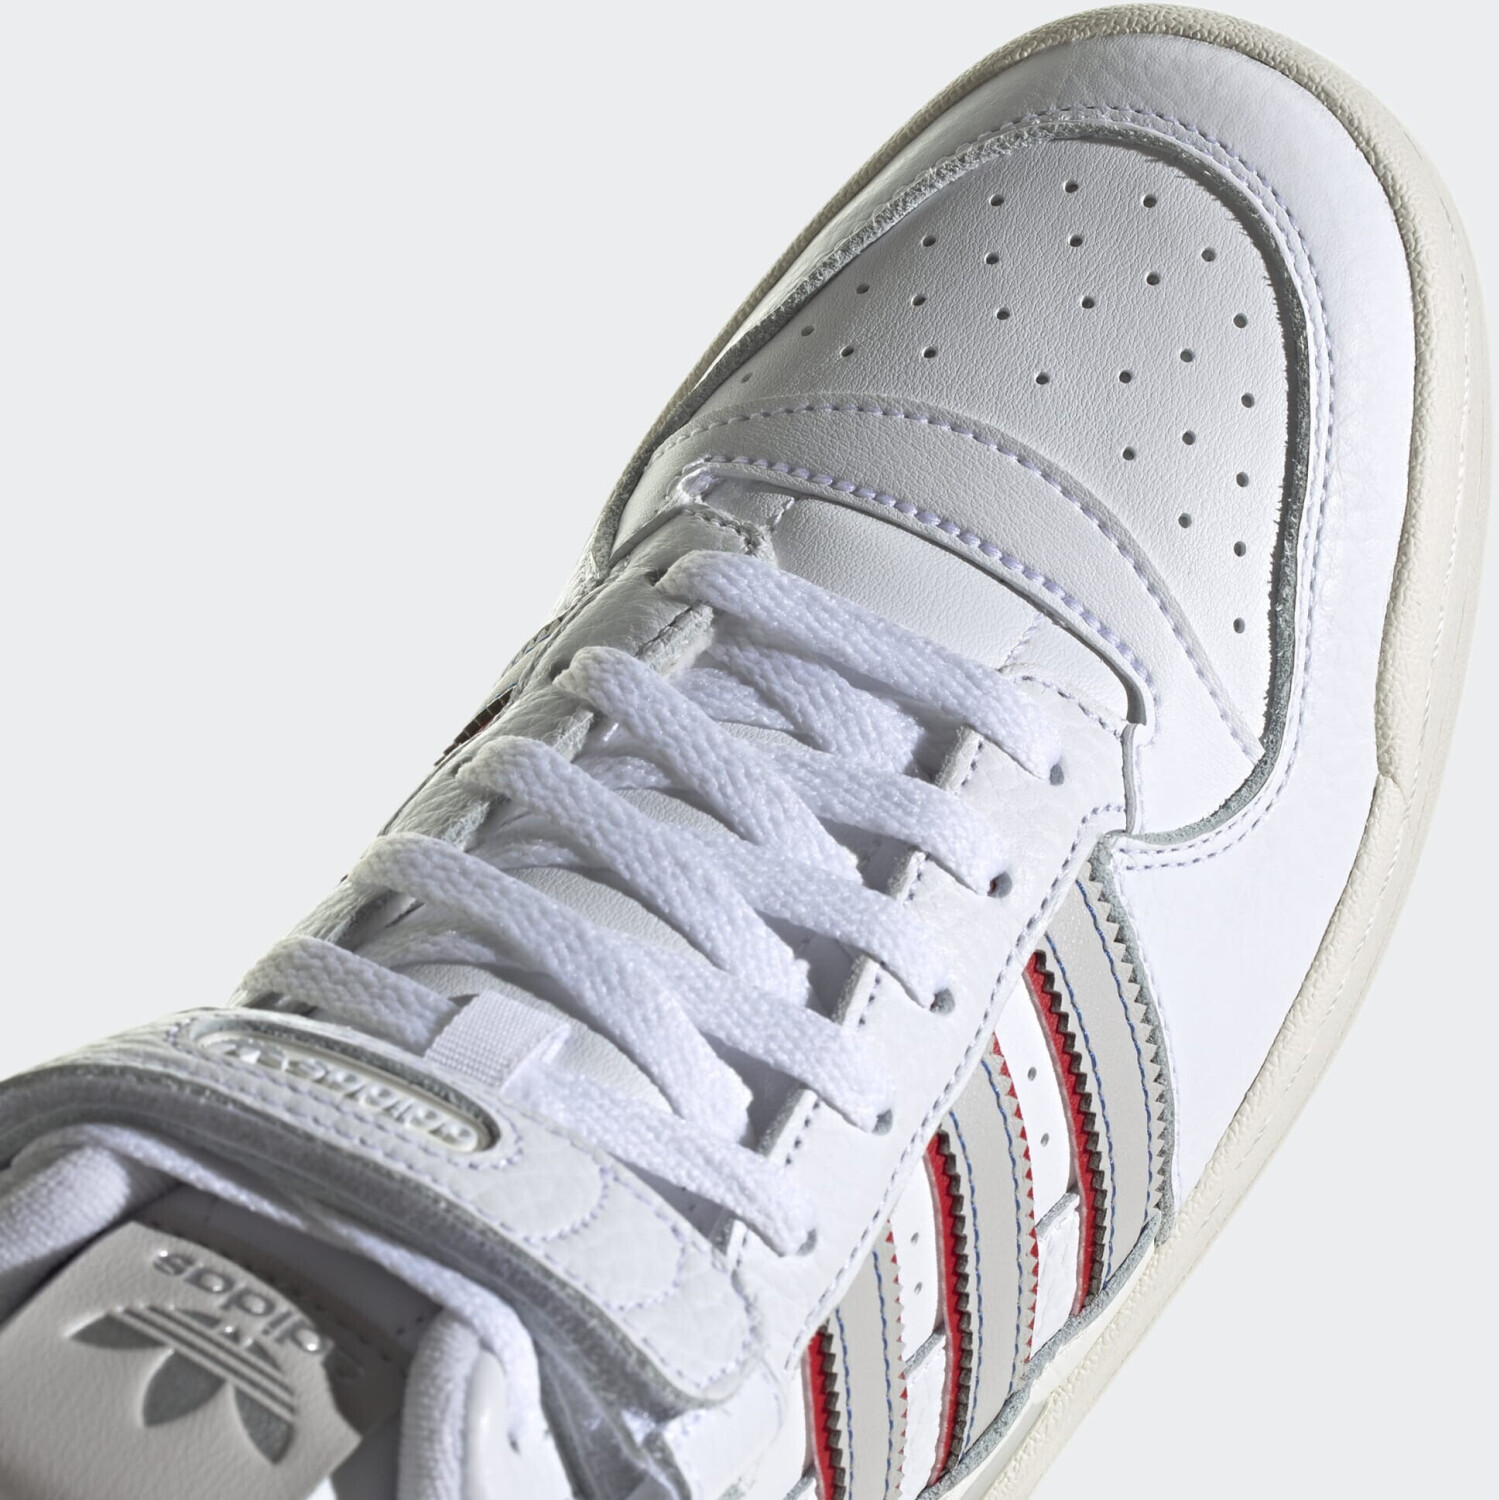 Adidas Originals Forum Mid Sneakers in White and Gray